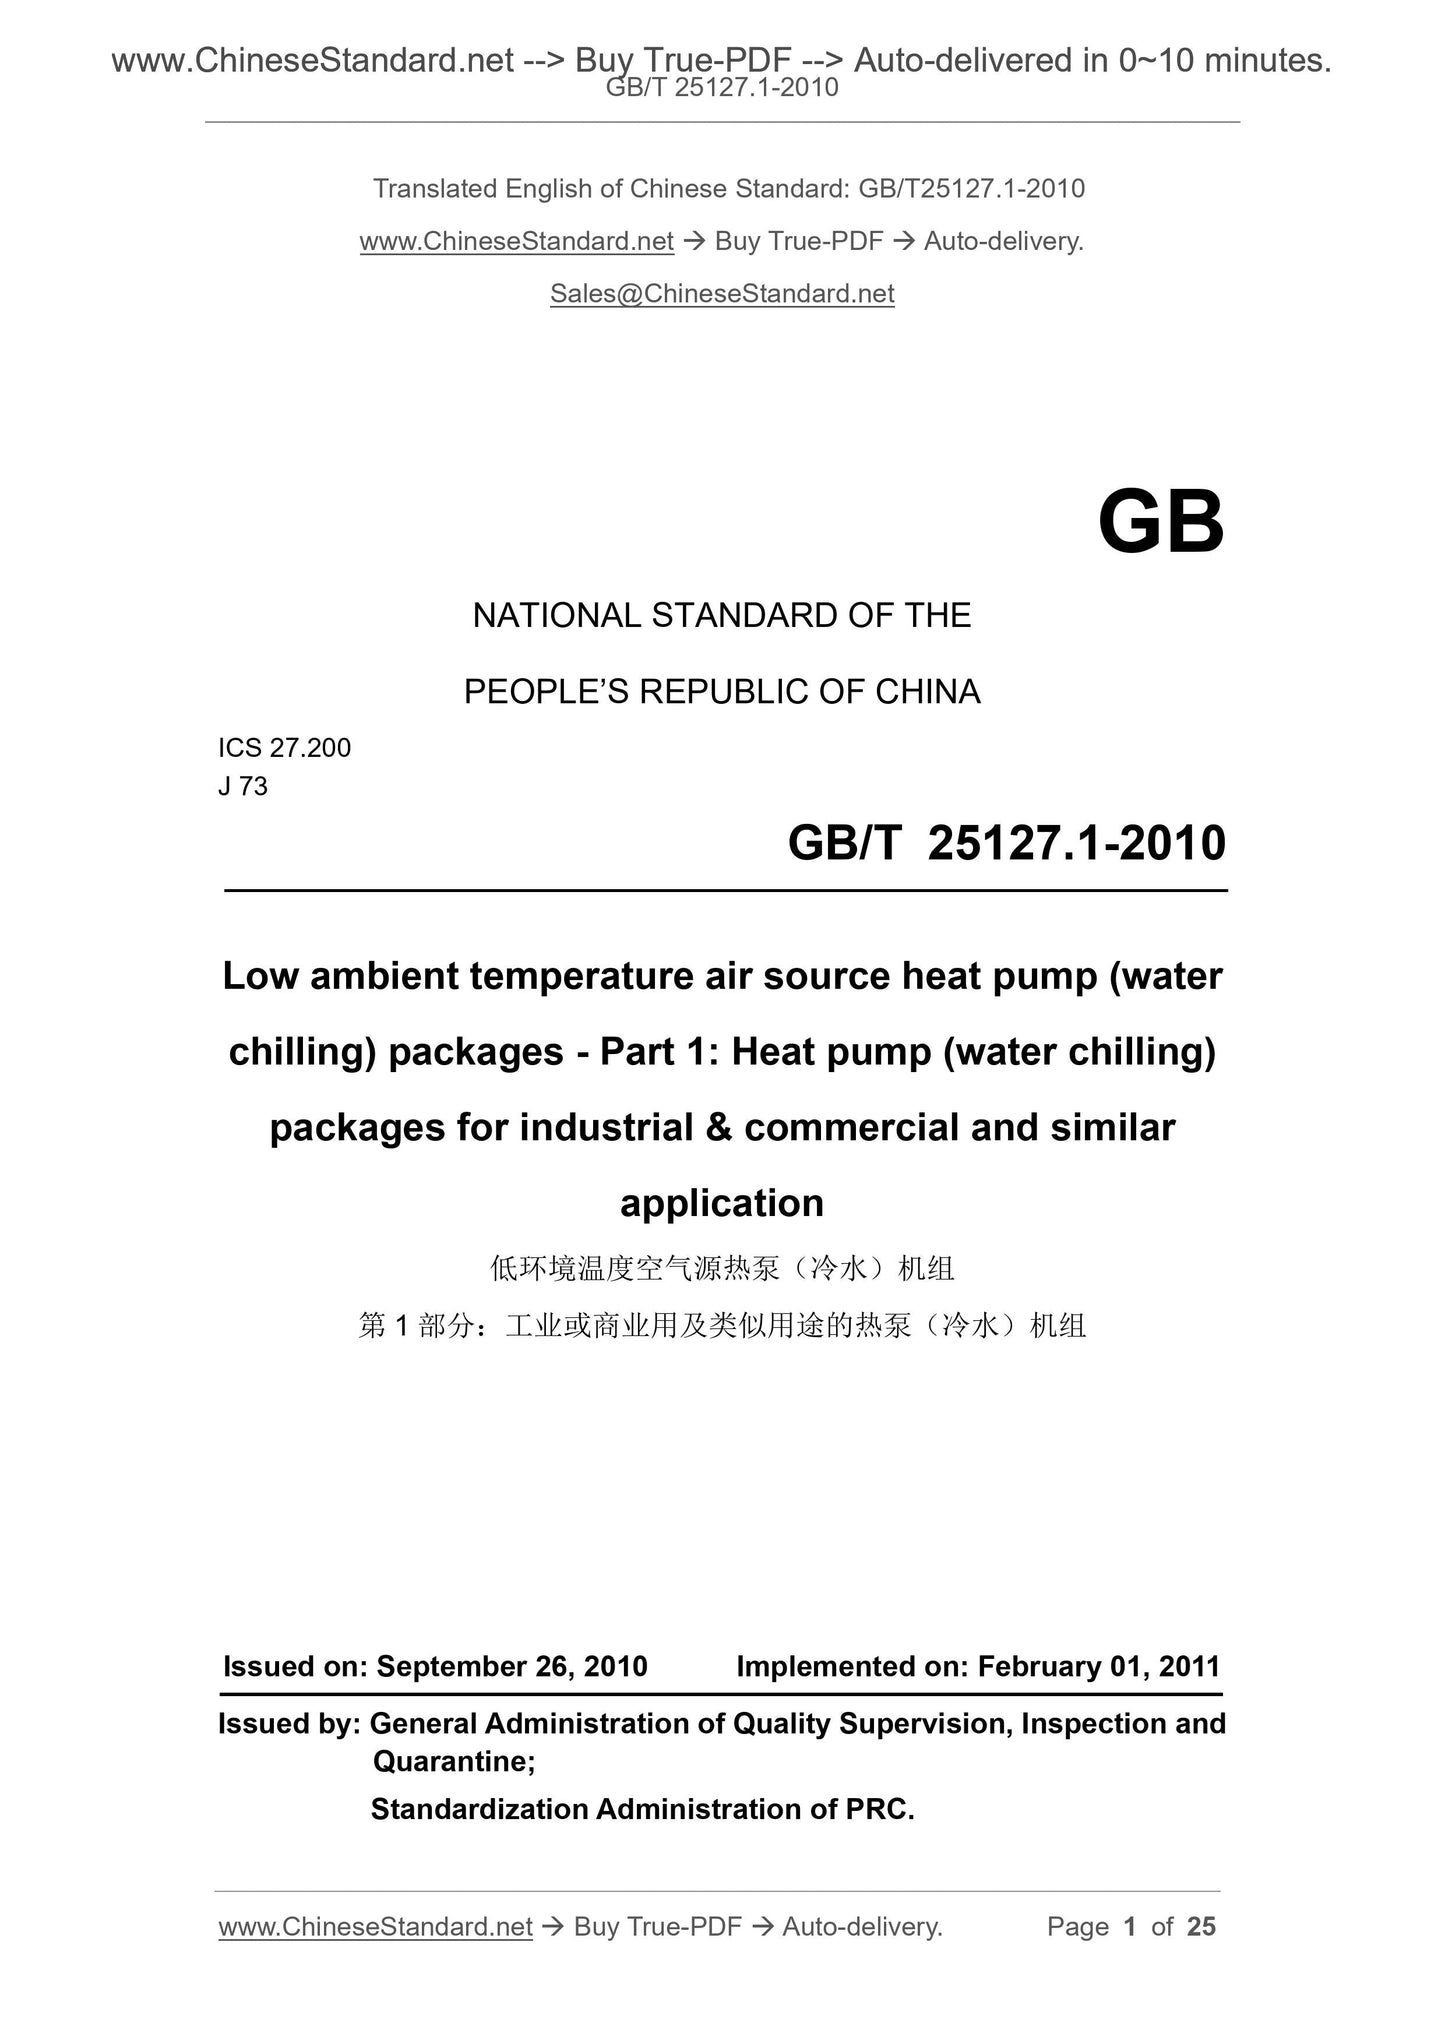 GB/T 25127.1-2010 Page 1